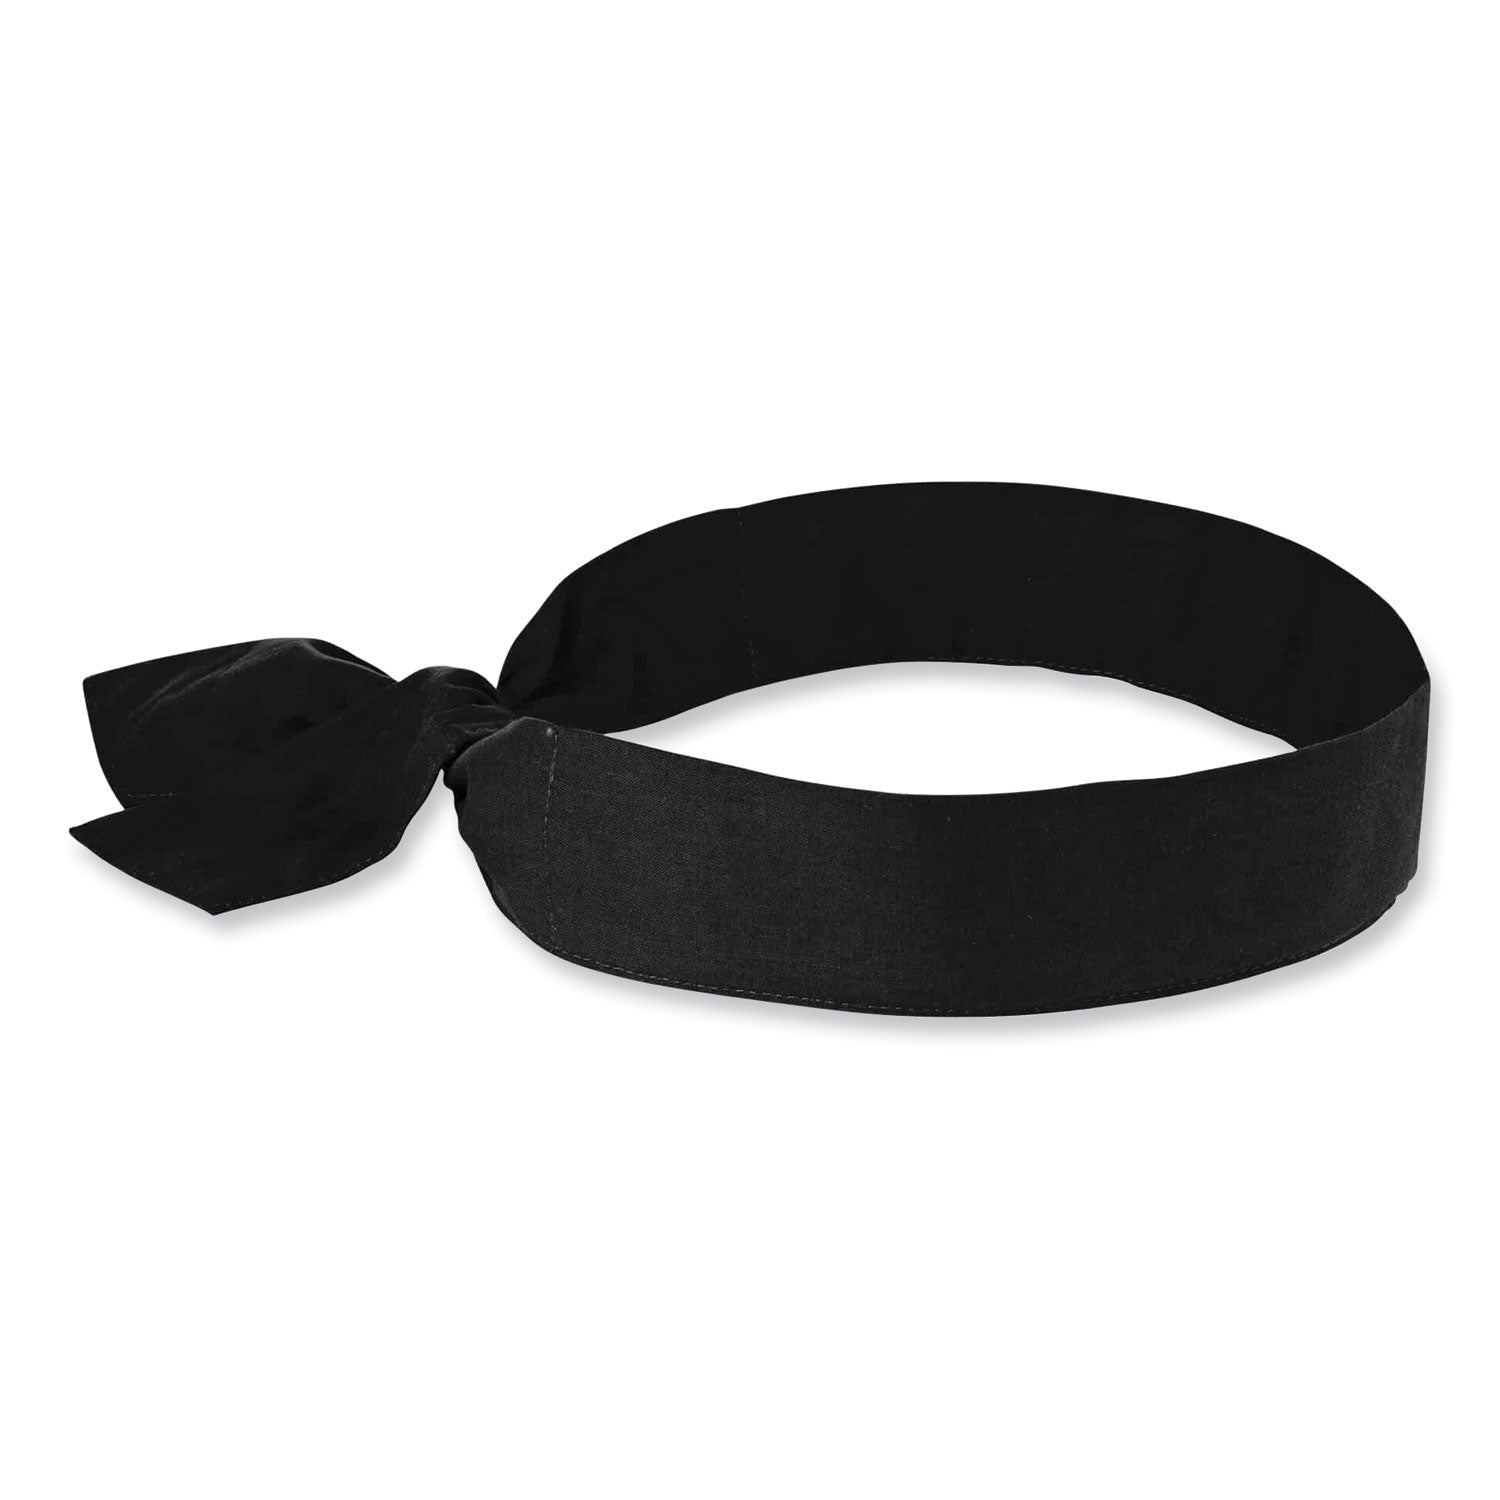 chill-its-6700-cooling-bandana-polymer-tie-headband-one-size-fits-most-black-ships-in-1-3-business-days_ego12332 - 1